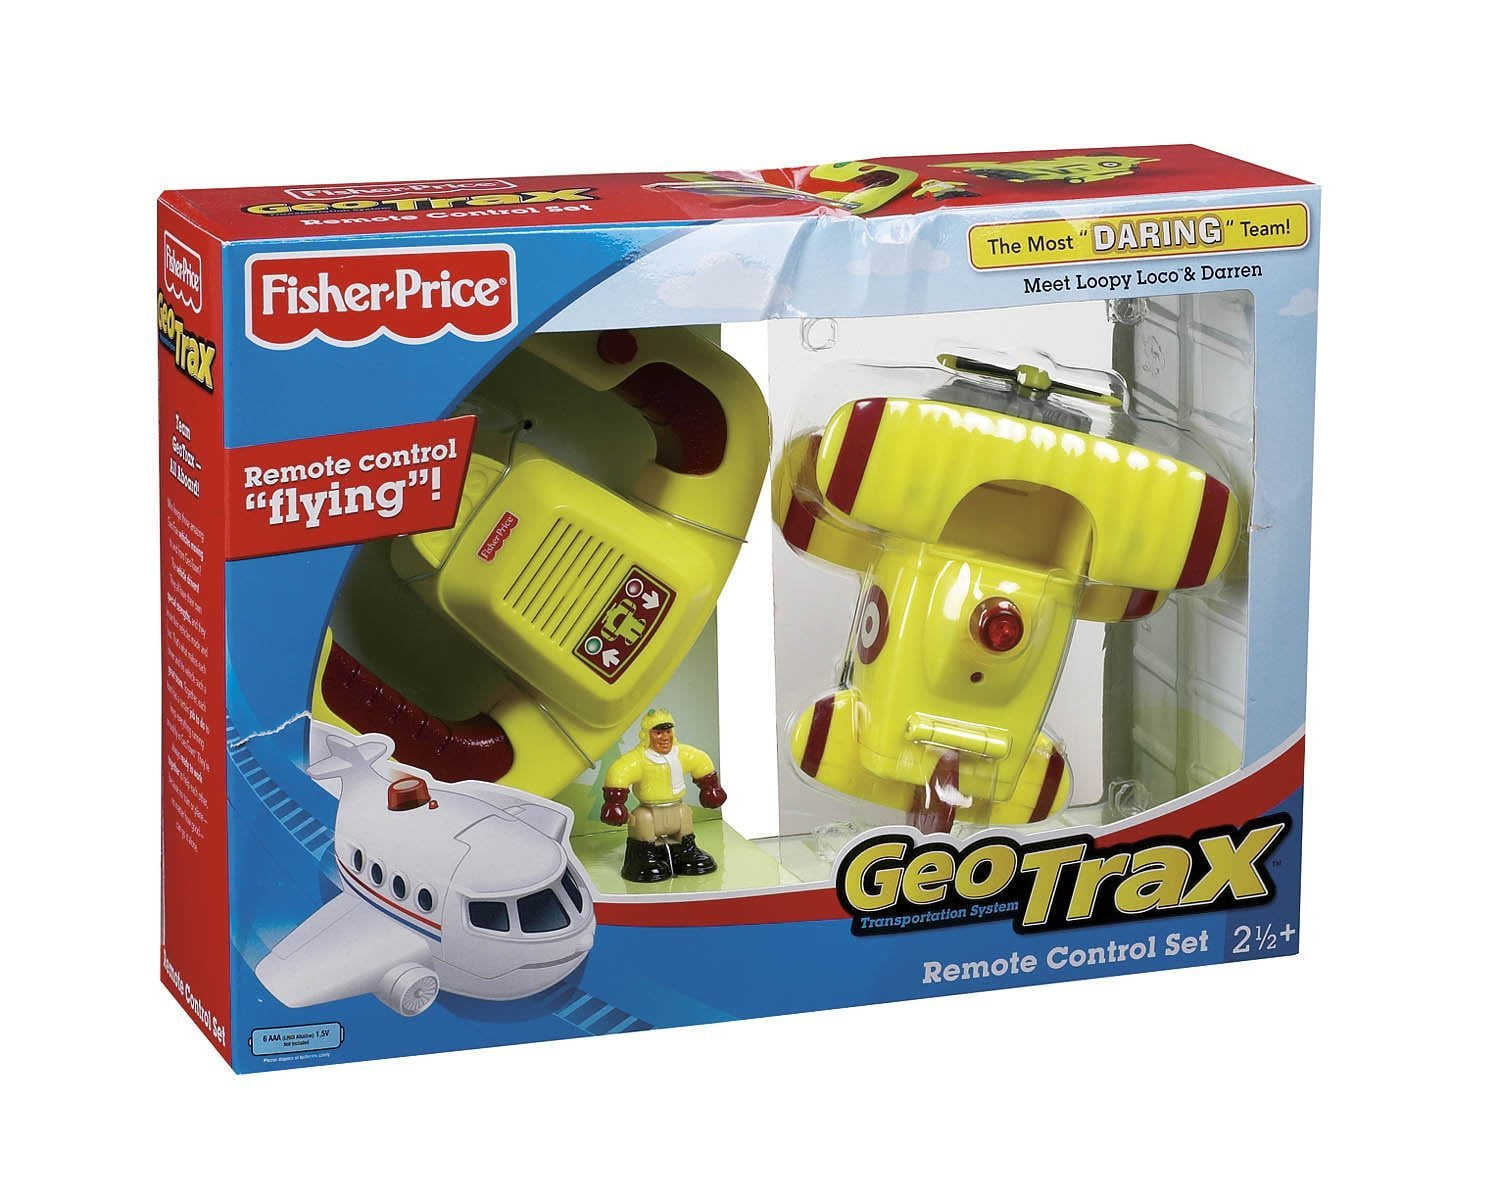 Your Choice Replacement Geotrax Fisher Price REMOTE CONTROL Unit 